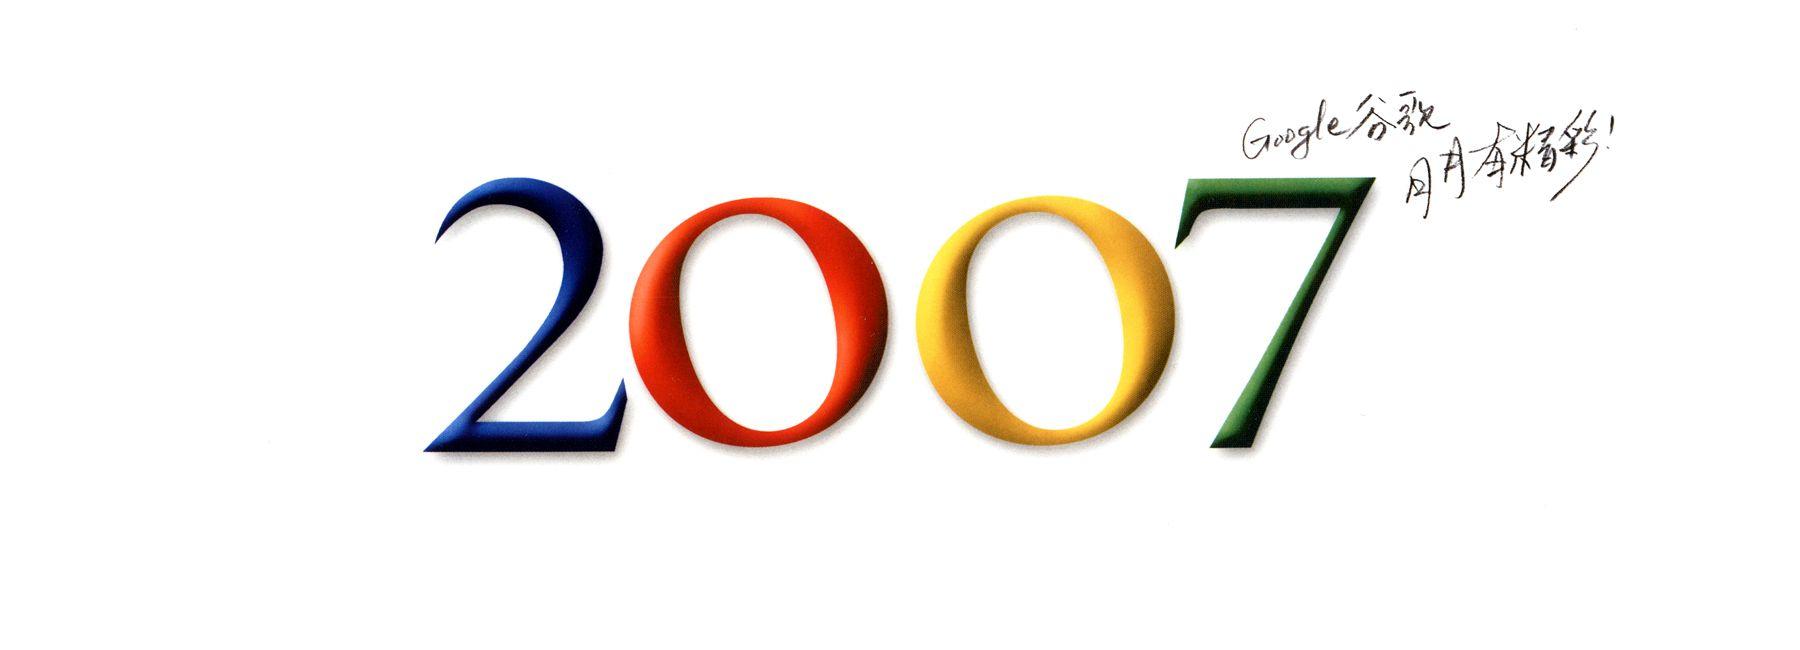 Official Google Logo - Google style logos' online museum and unofficial Google